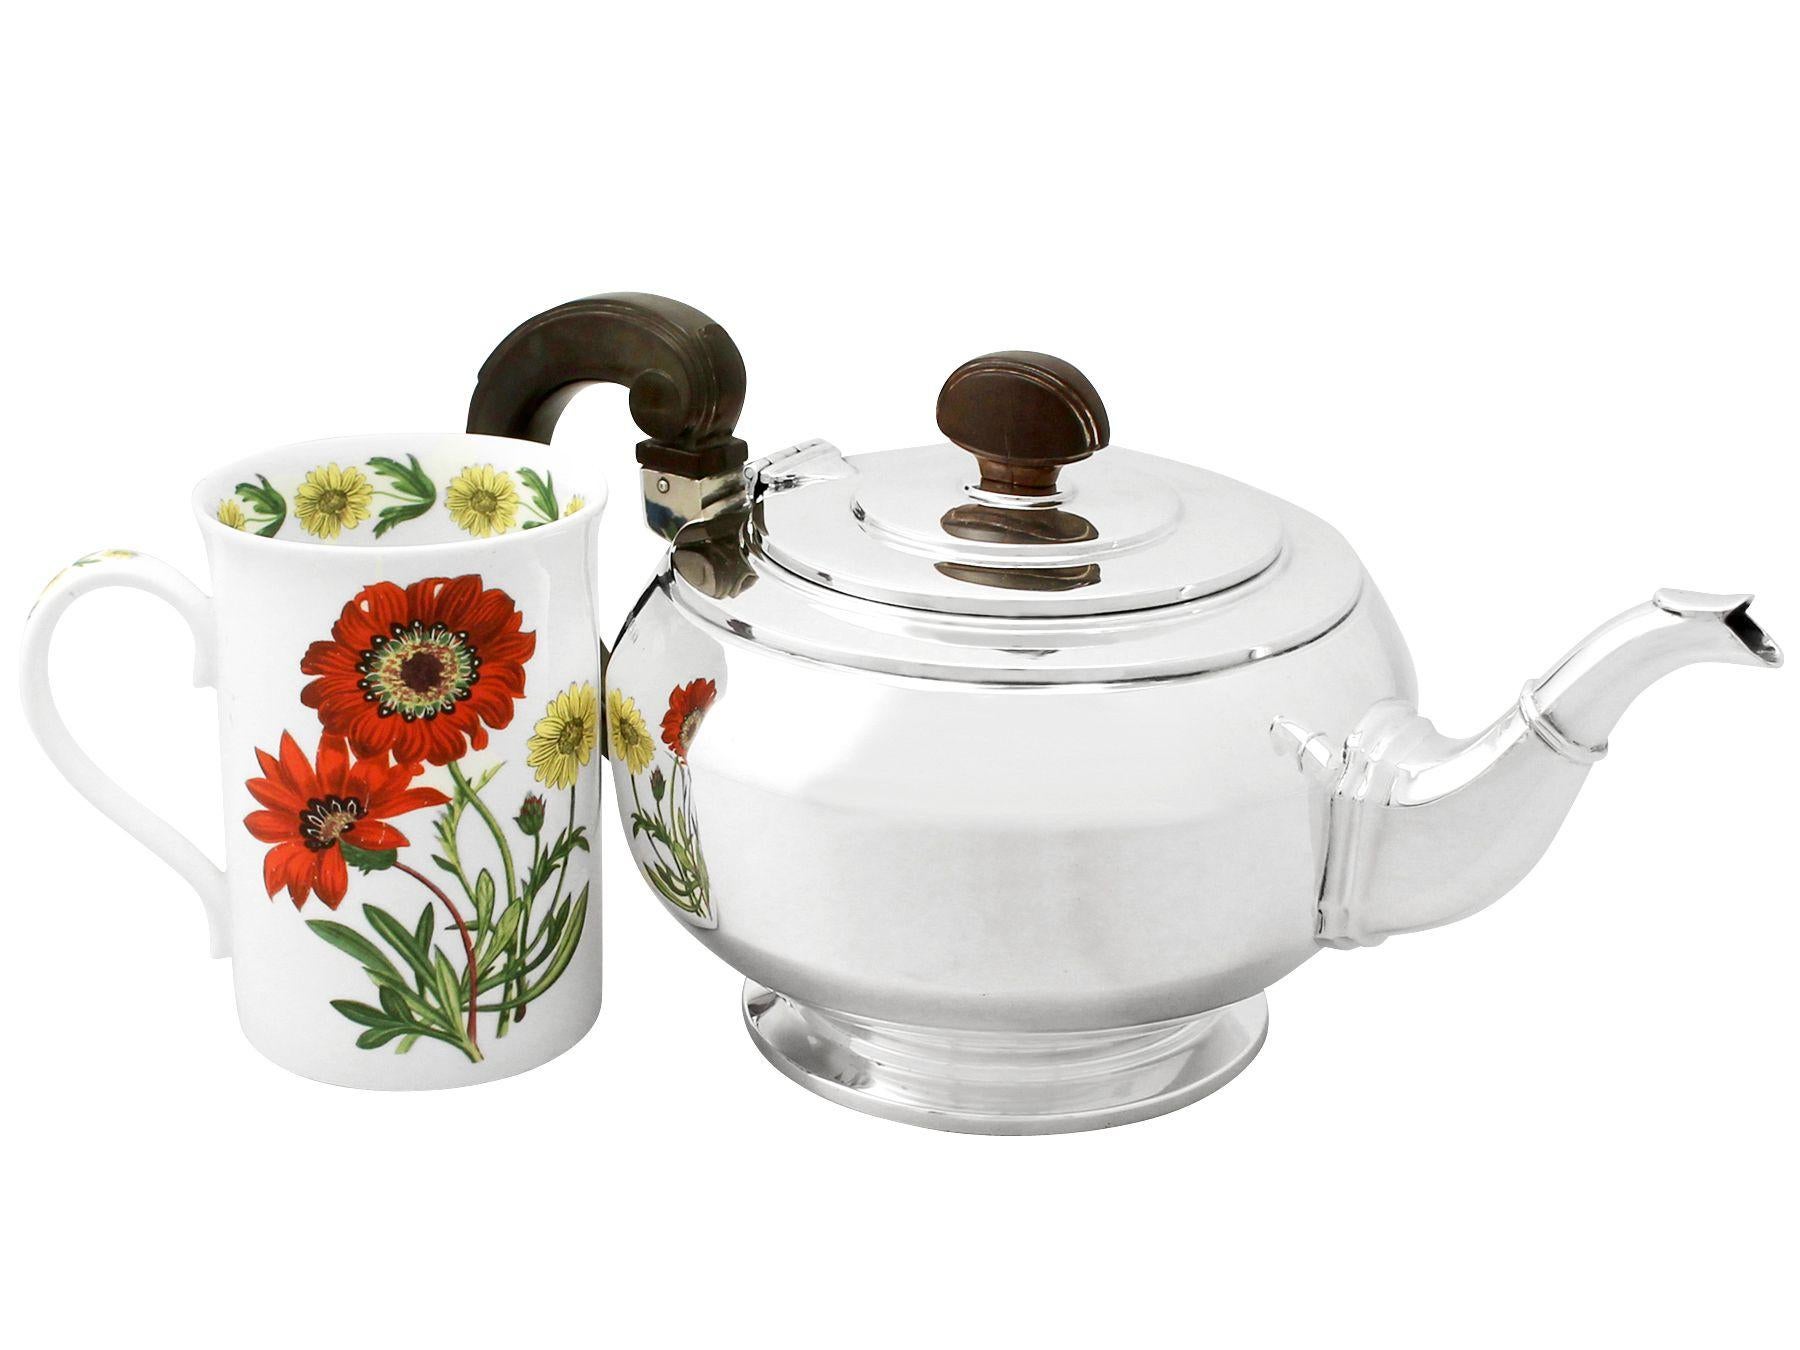 A fine and impressive antique George VI English sterling silver teapot in the Art Deco style, an addition to our silver teaware collection.

This fine antique George VI sterling silver teapot has a plain circular rounded form onto a circular stepped